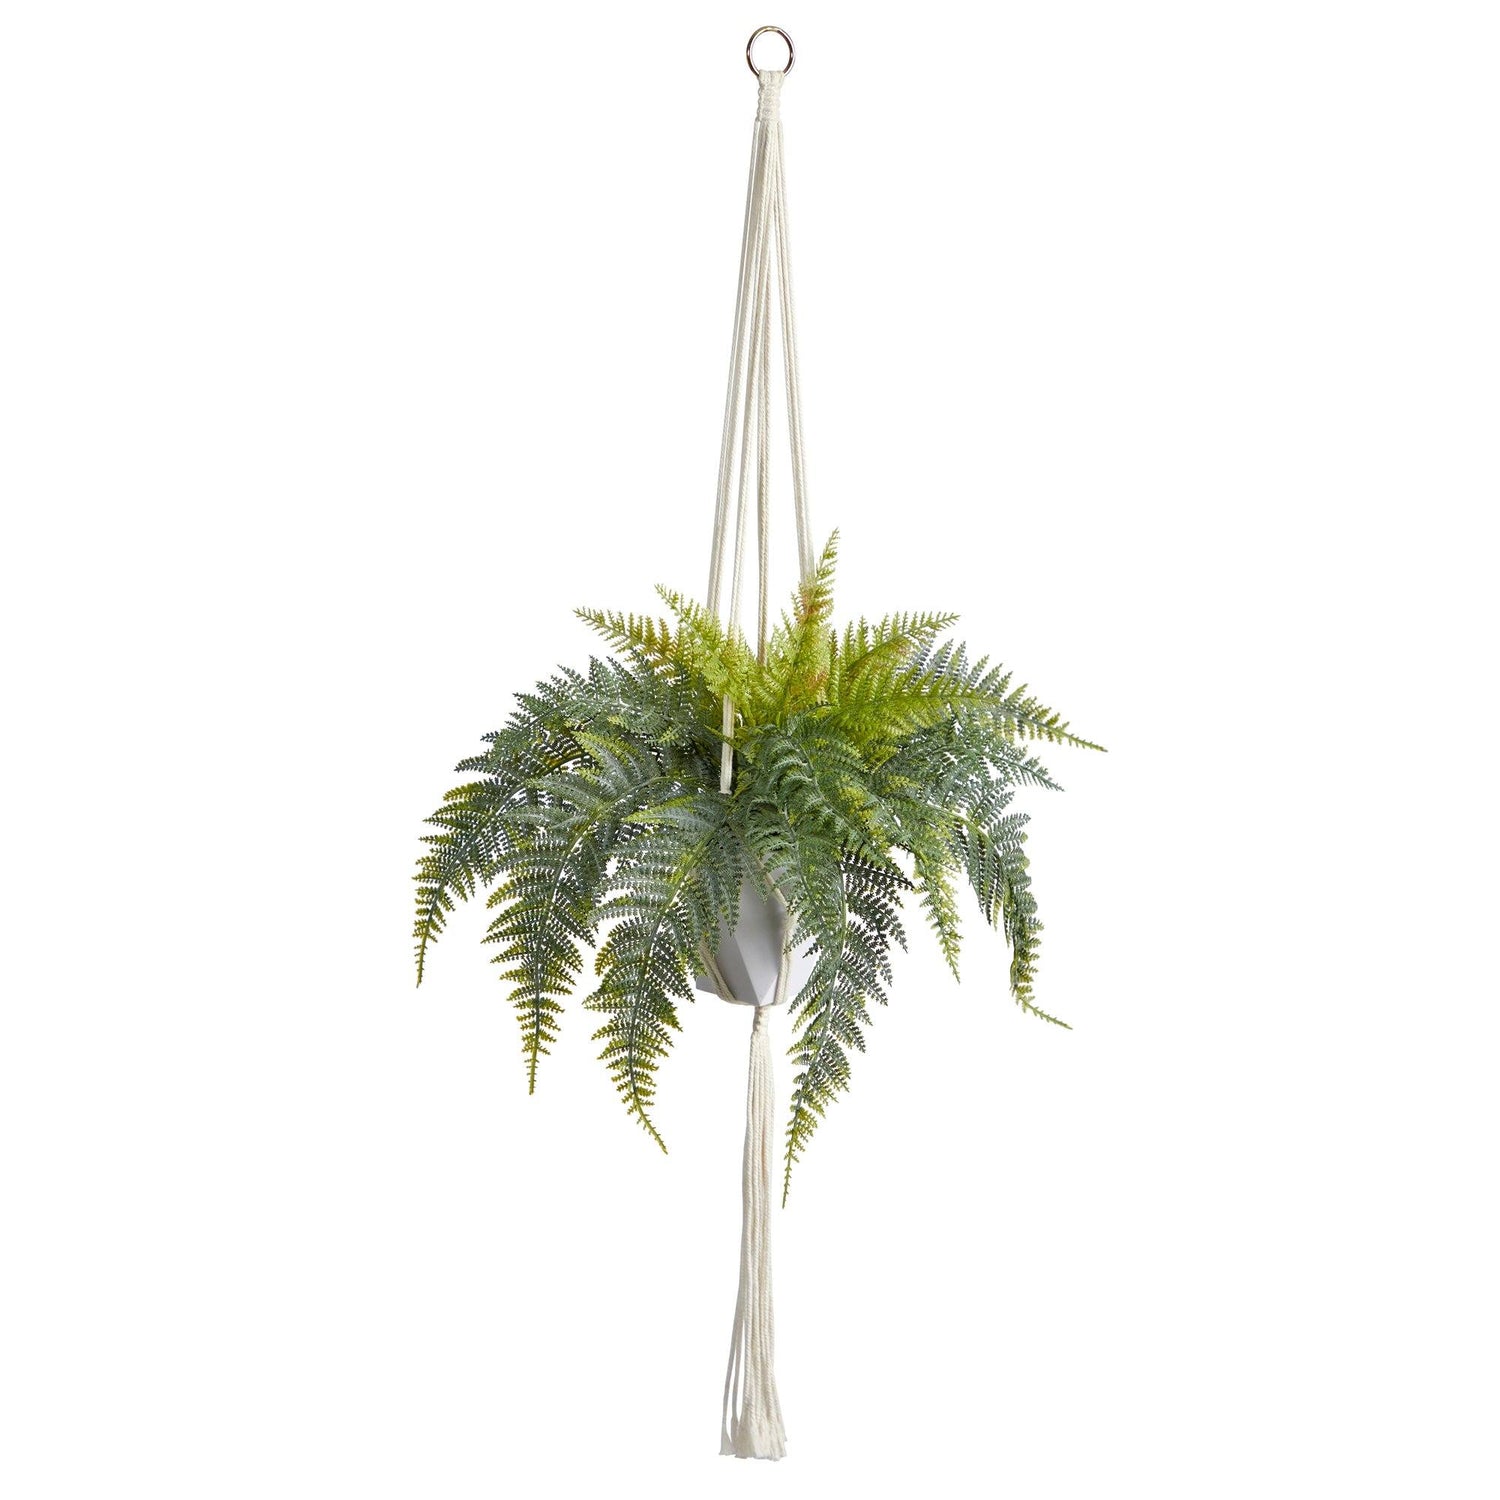 25” Fern Hanging Artificial Plant in Decorative Basket